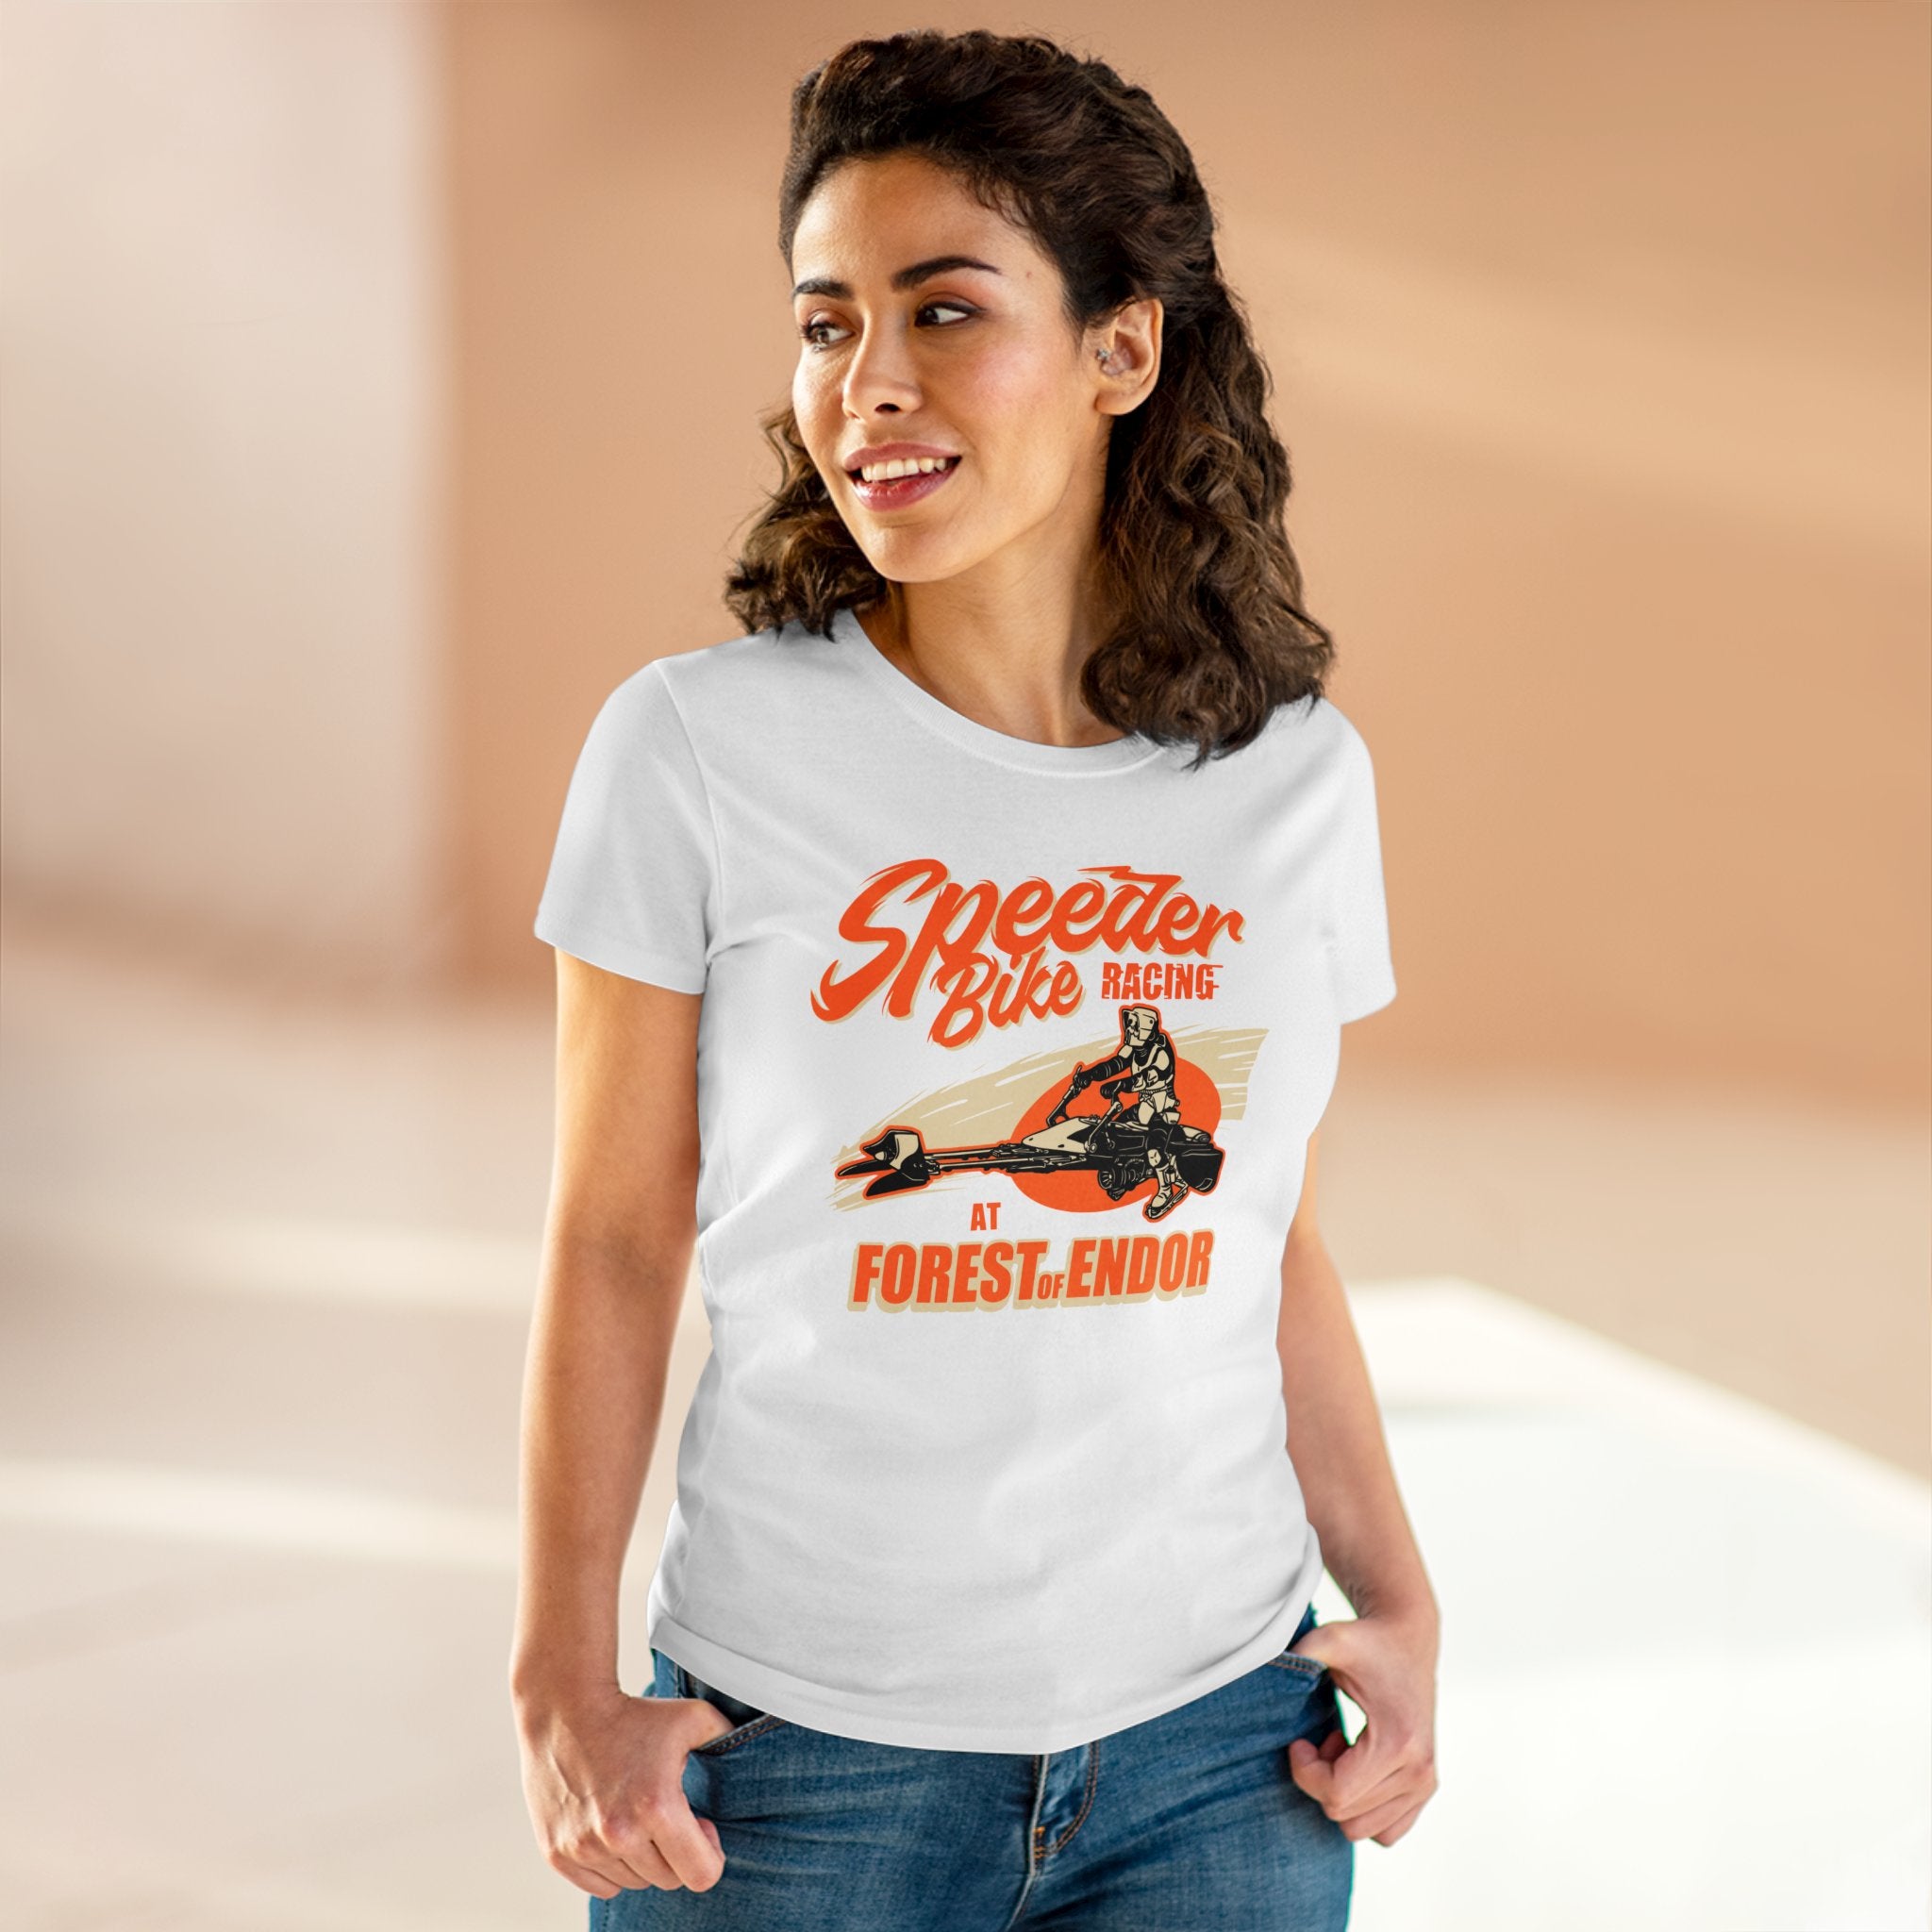 A woman with curly hair is wearing a white, pre-shrunk cotton Speeder Bike Racing - Women's Tee with an orange and black graphic. She stands smiling in a light-filled room.